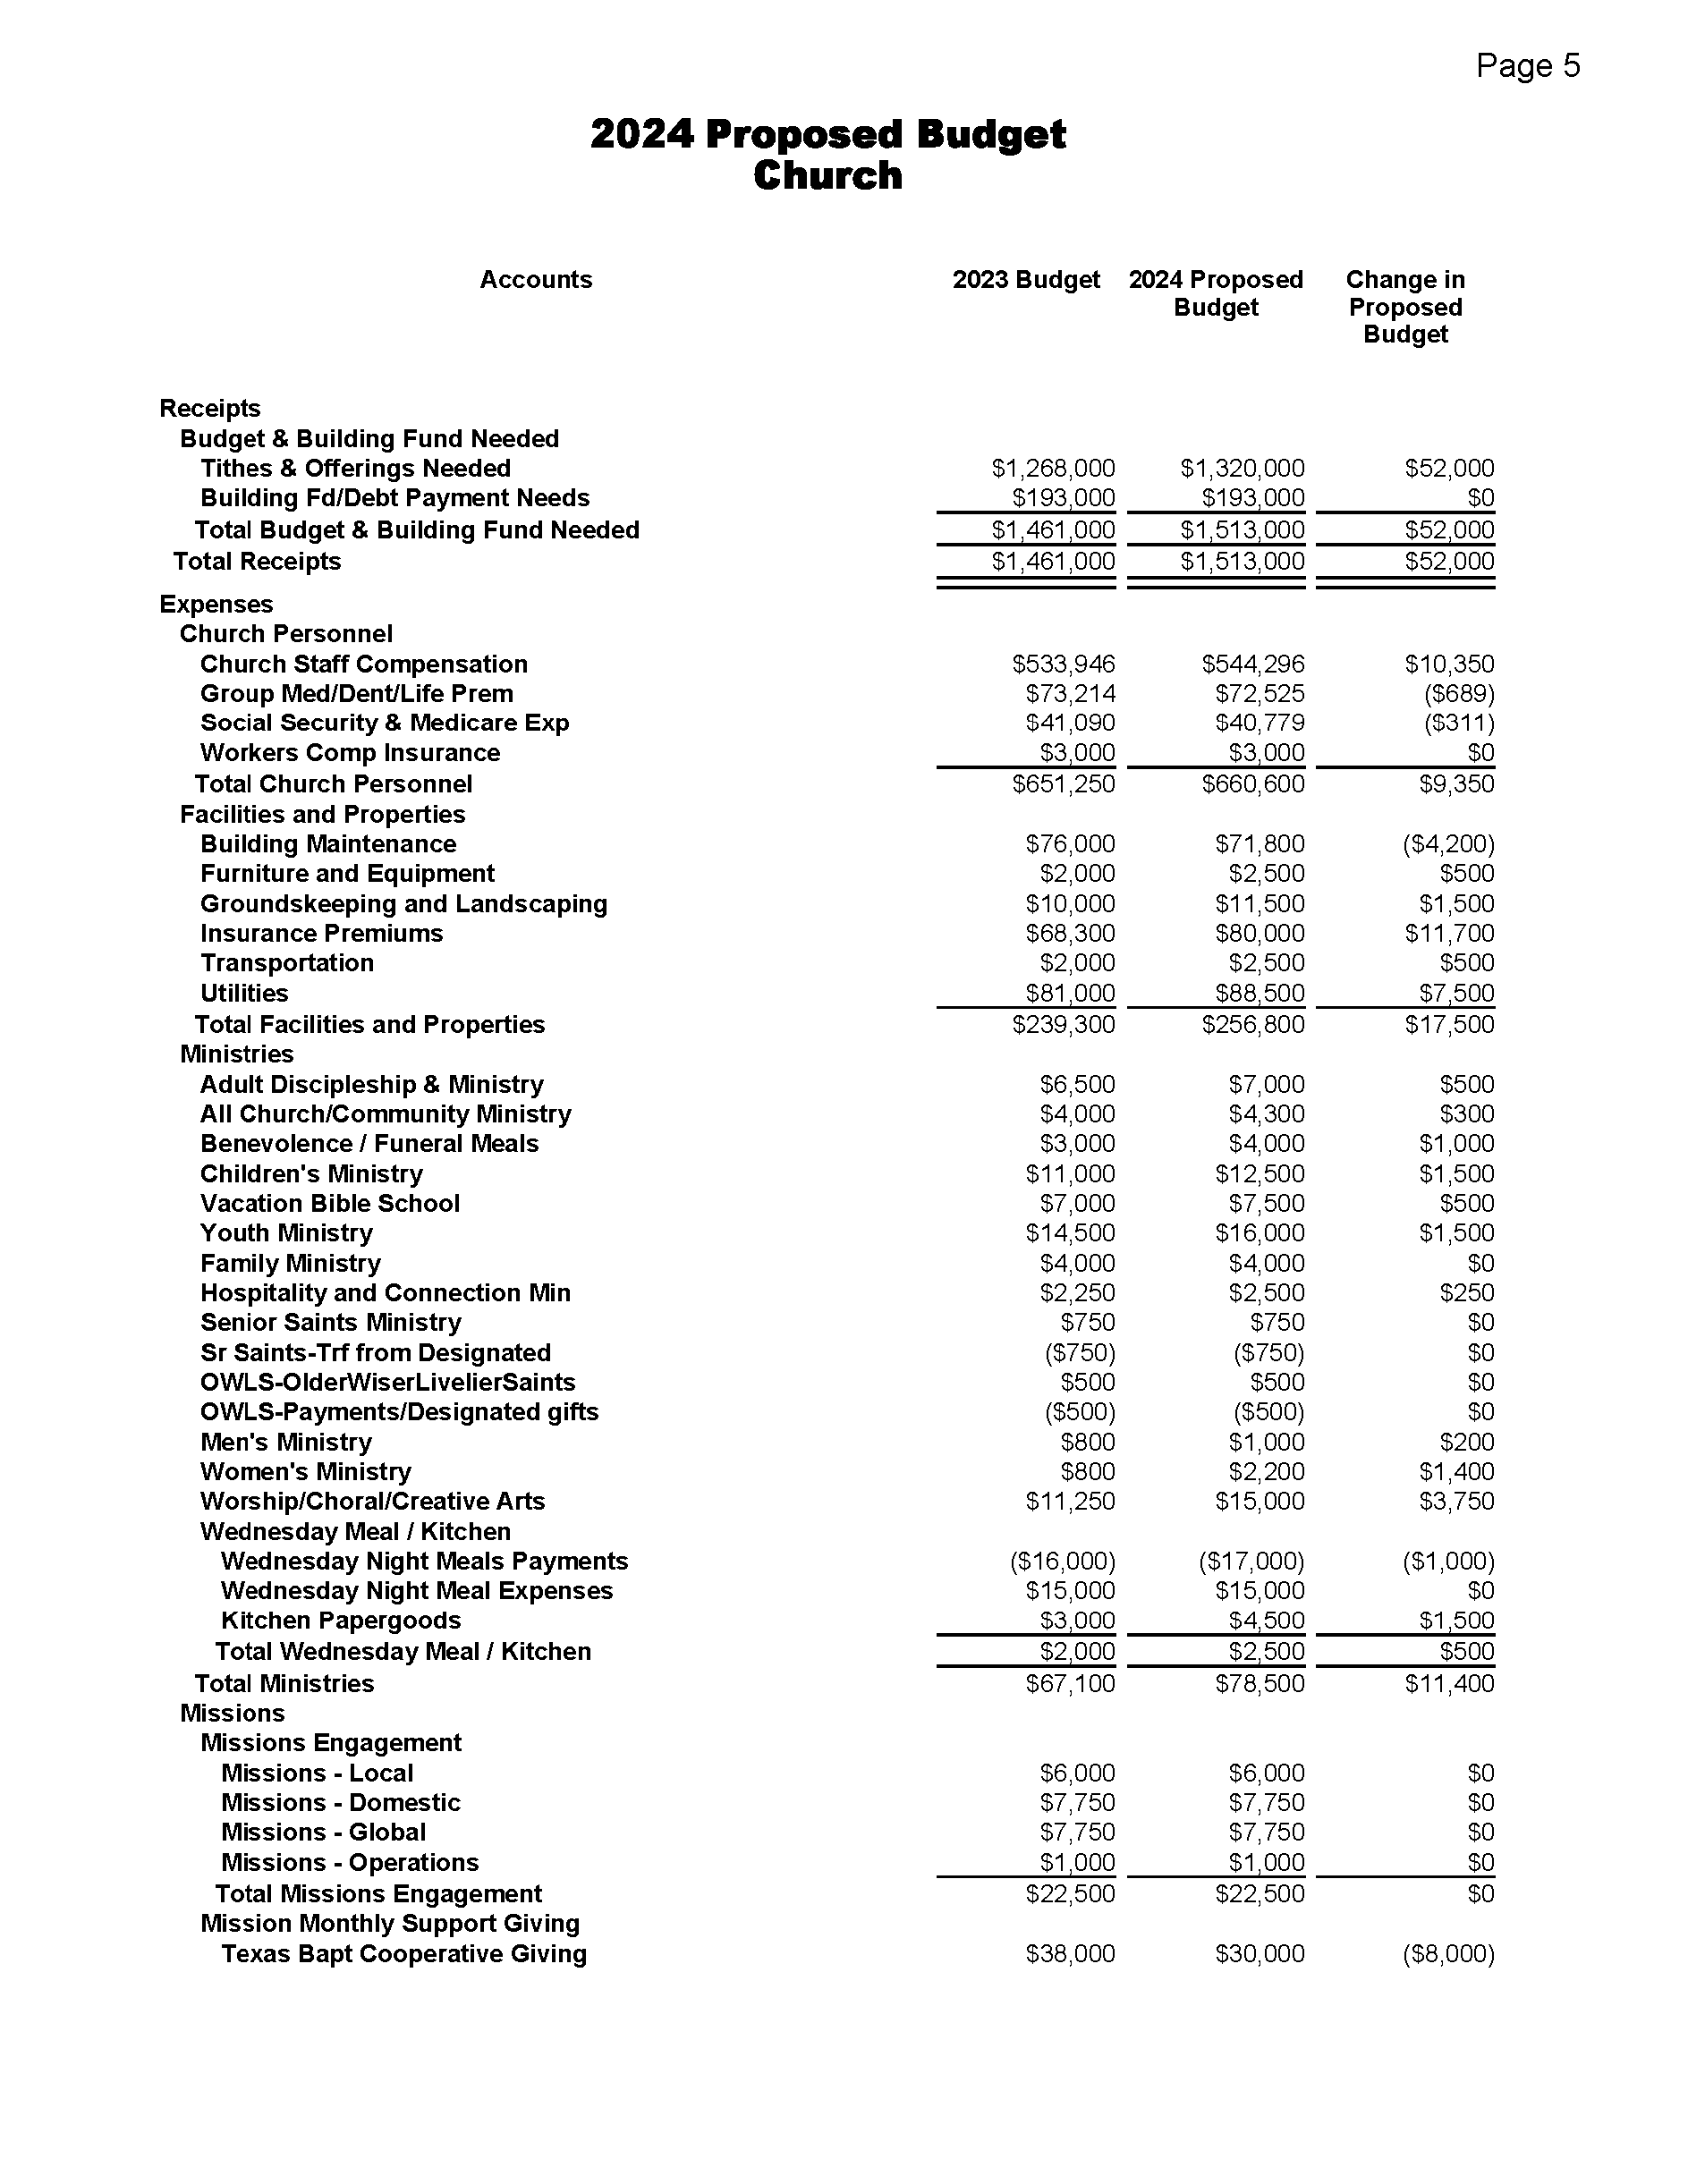 2024 Proposed Budget Conference Packet 12-3-23_Page_5.png